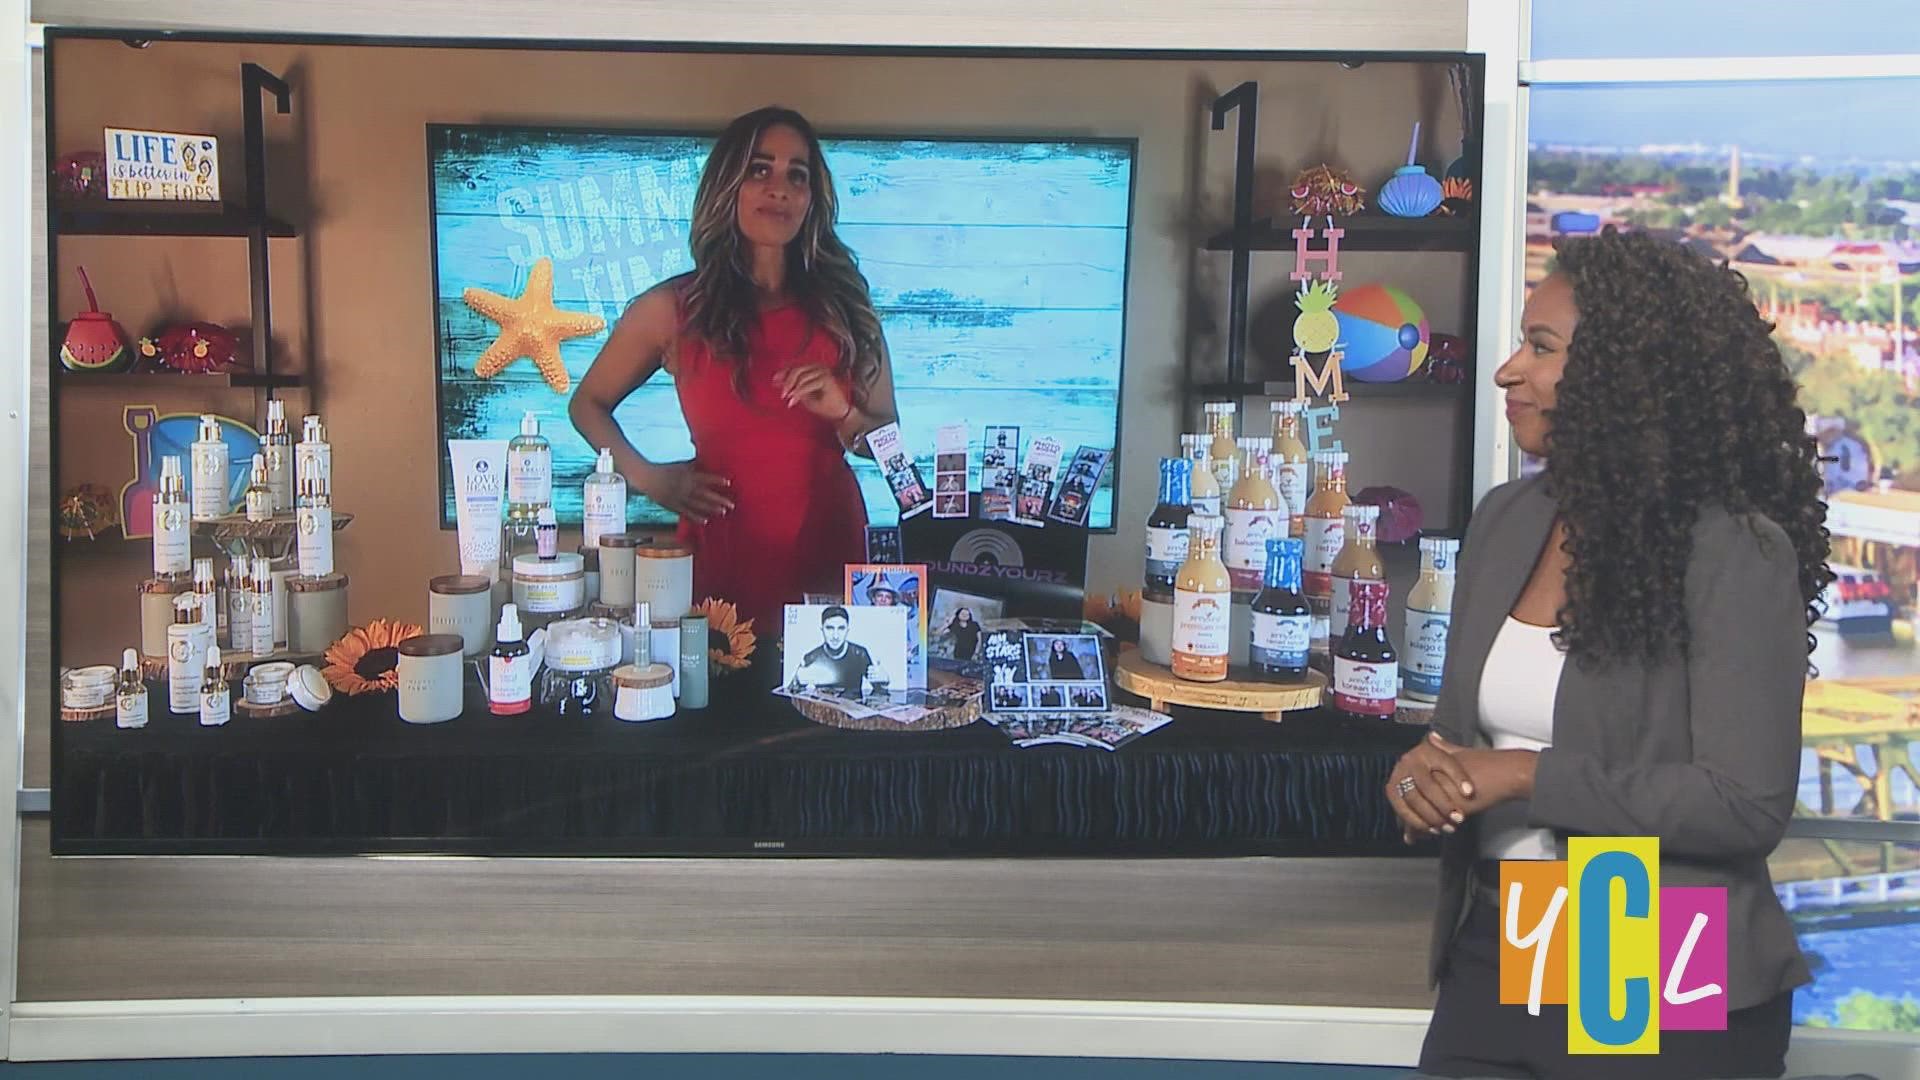 We're getting ready for Summer with tasty healthy options, party must-haves and more! This segment paid for by Sima Cohen.